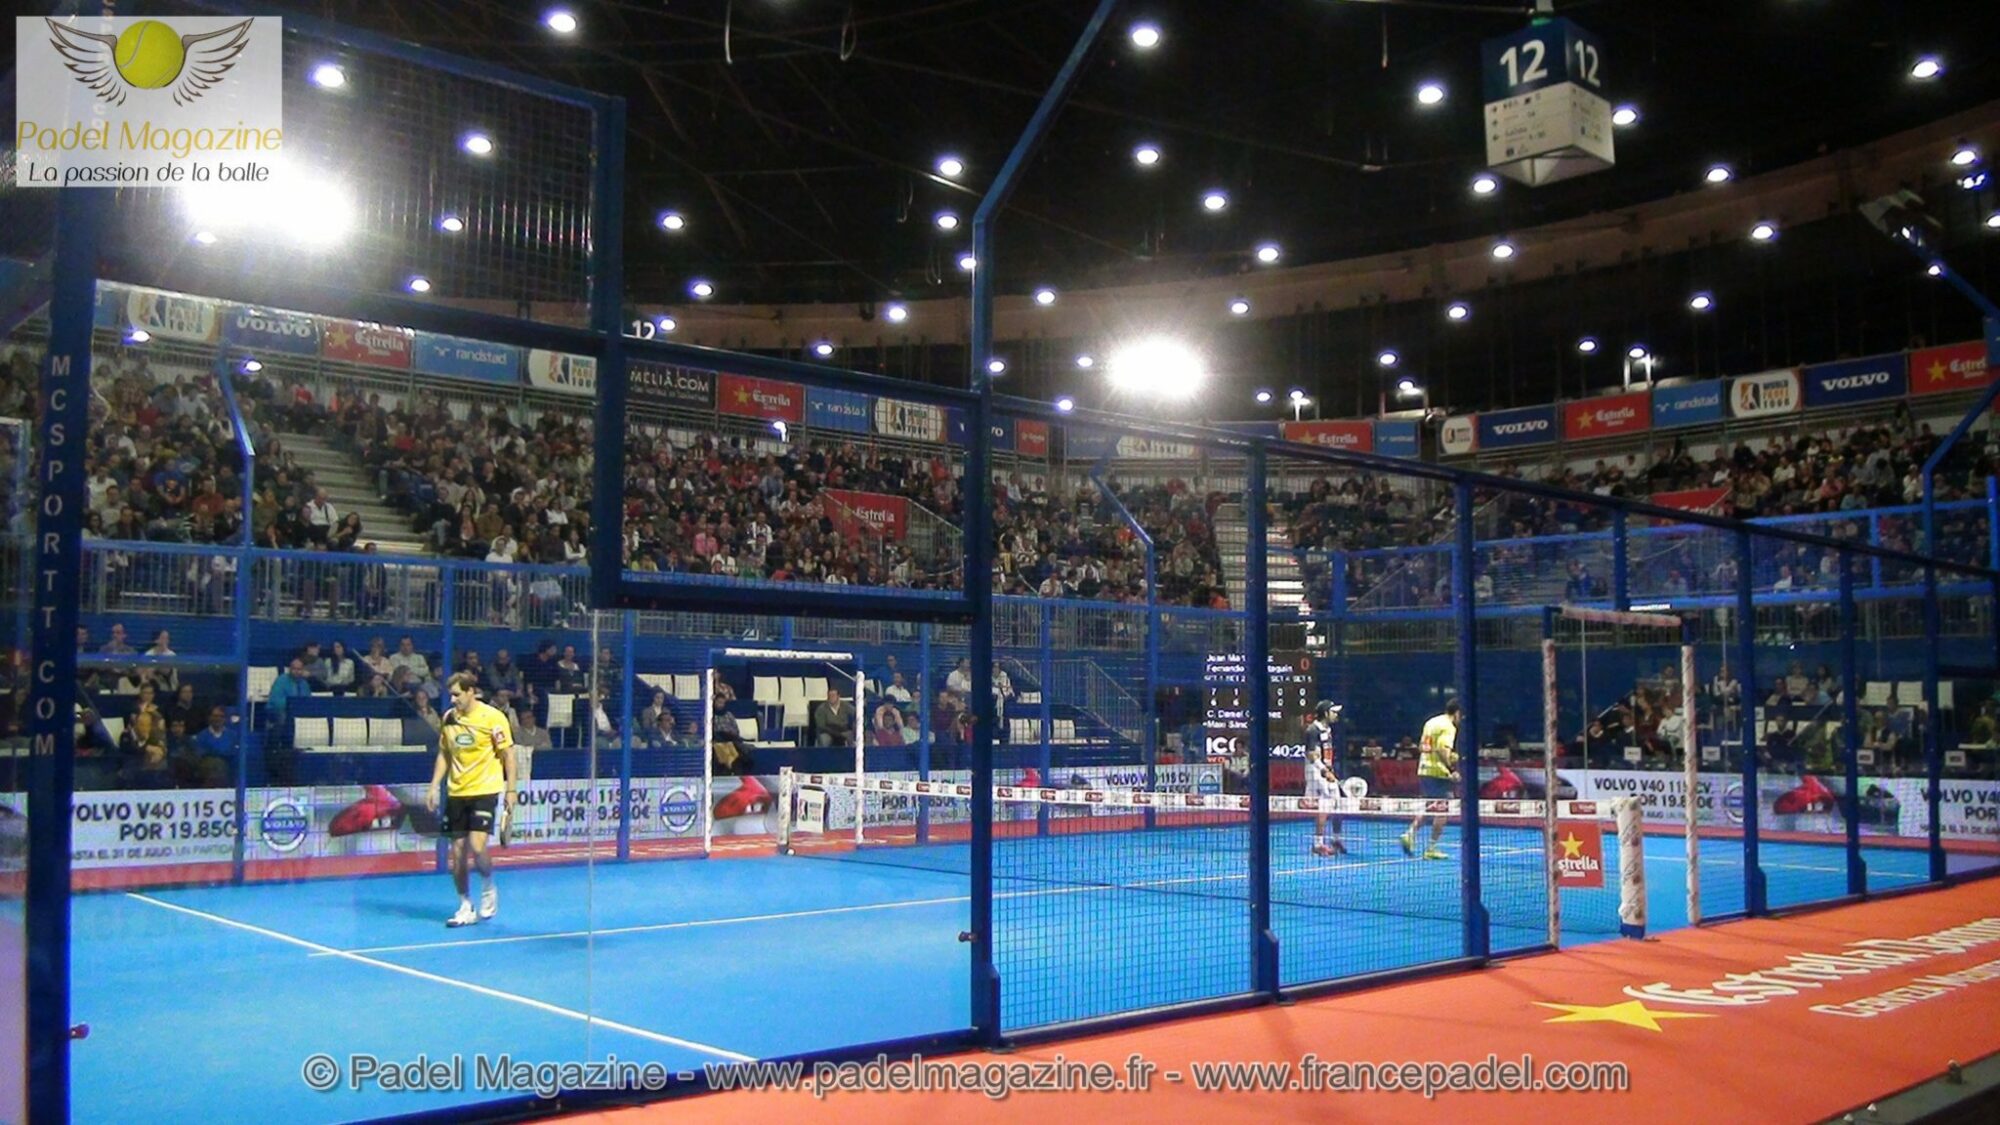 Stories of the professional circuits of padel